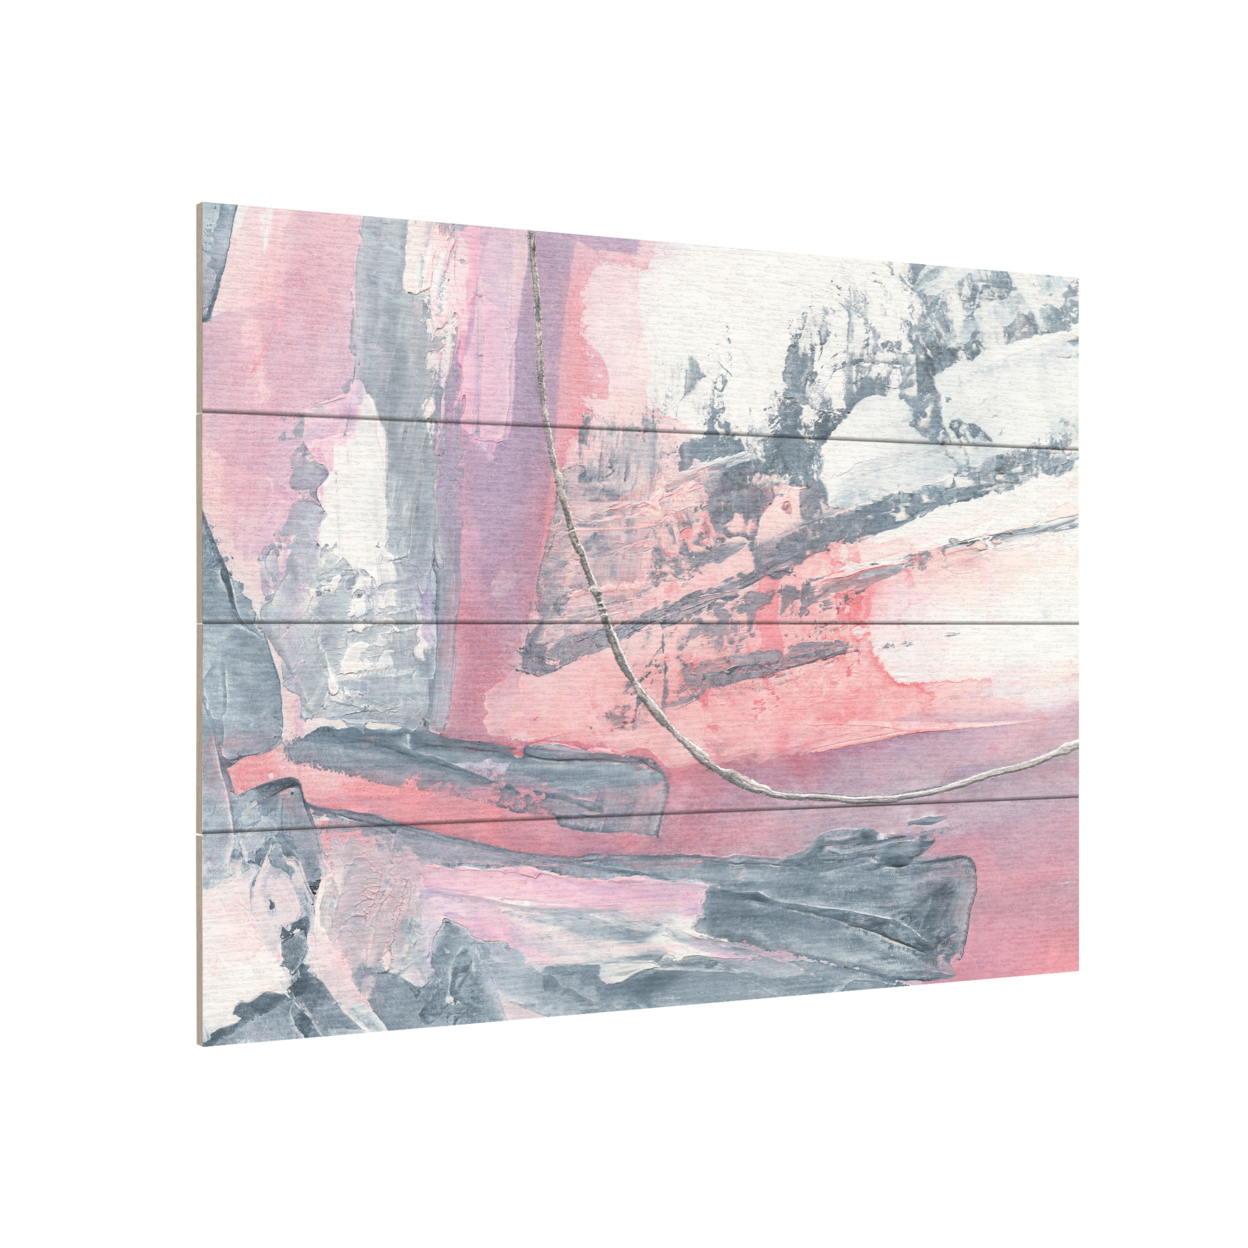 Wall Art 12 X 16 Inches Titled Whitewashed Blush I Ready To Hang Printed On Wooden Planks